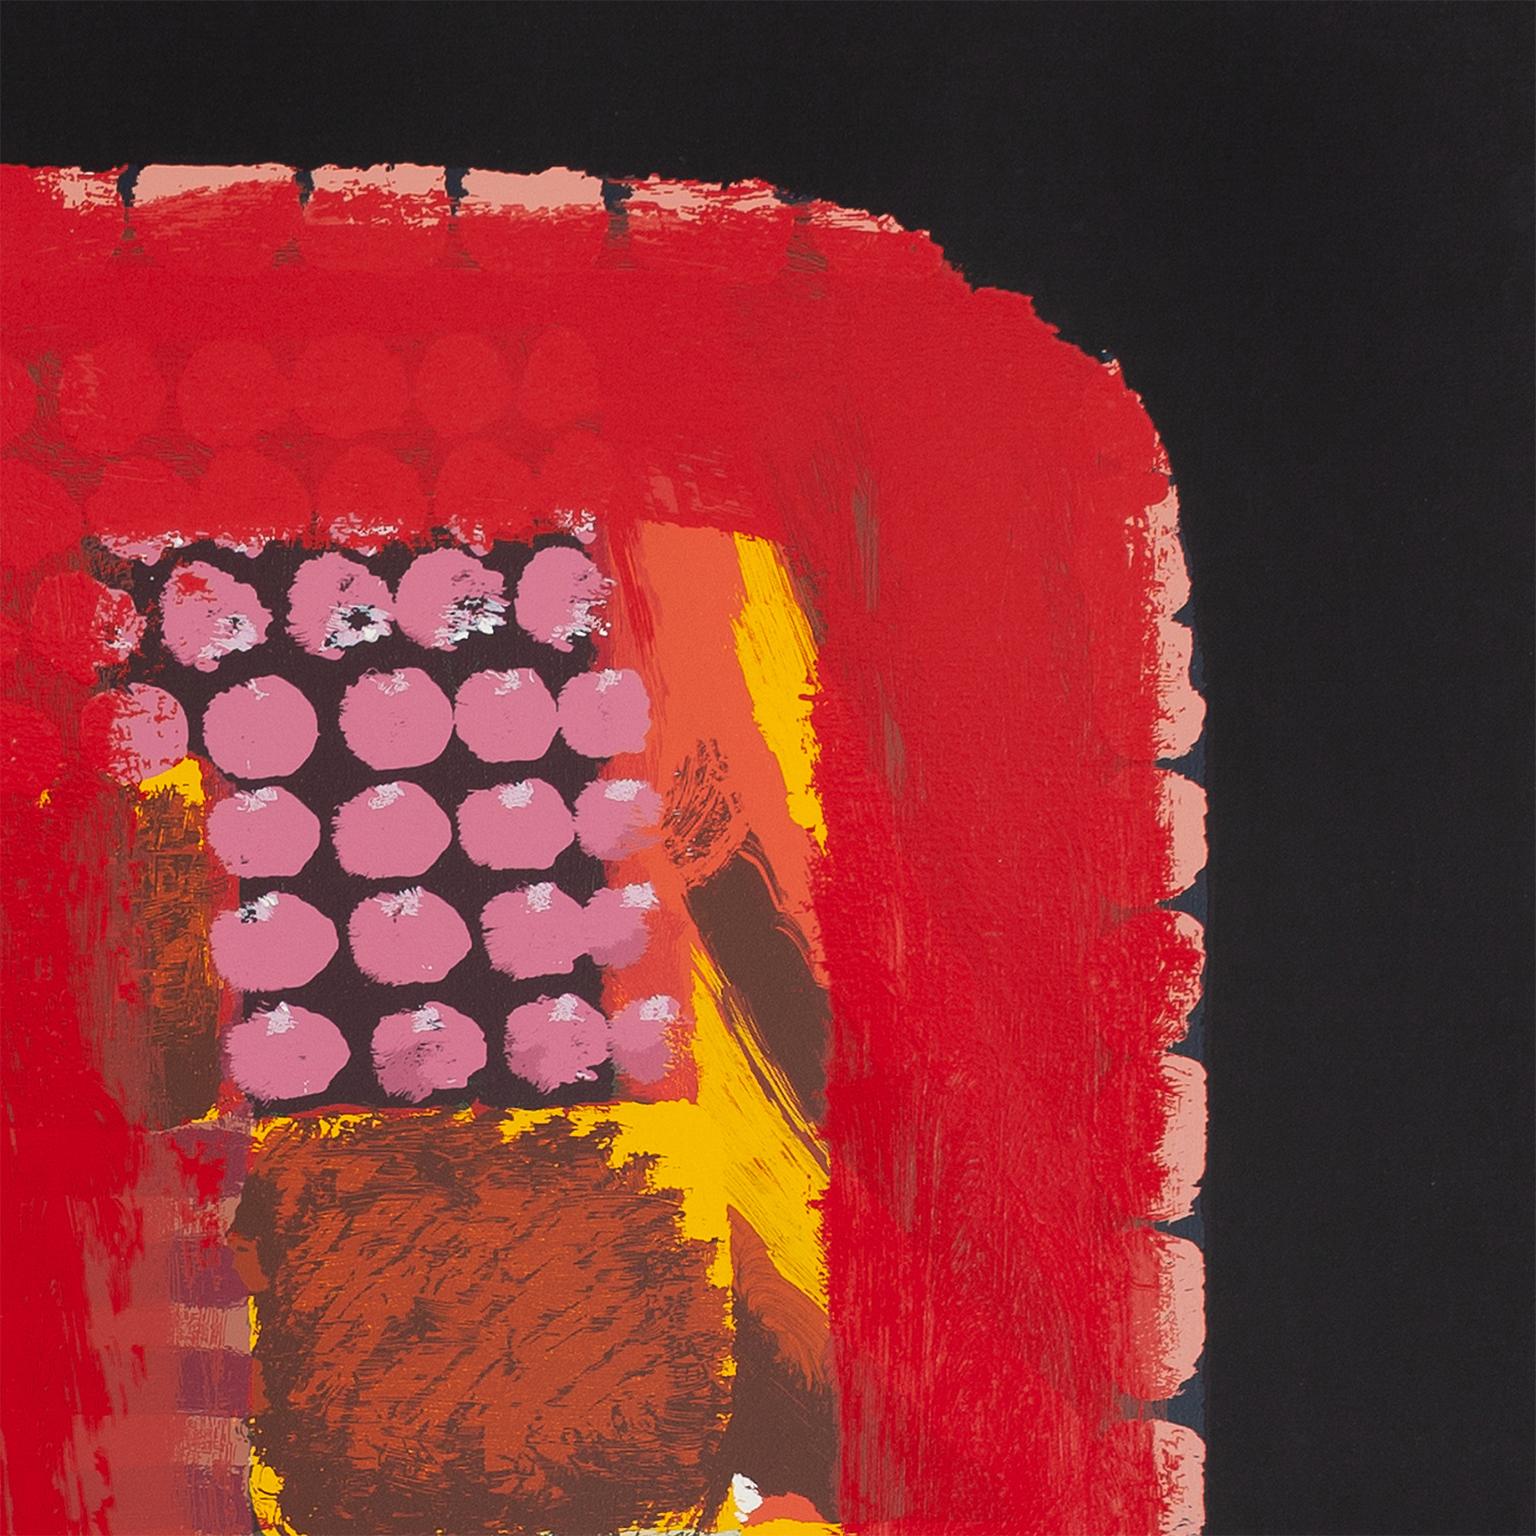 47.5 x 57.2 in. / 121 x 146 cm.

29 color screen print on heavy stock signed by the artist lower right in red crayon. Created by the artist for his exhibition at Knoedler Gallery, New York, 1980, it reproduces the eponymous oil painting, 1977-1979